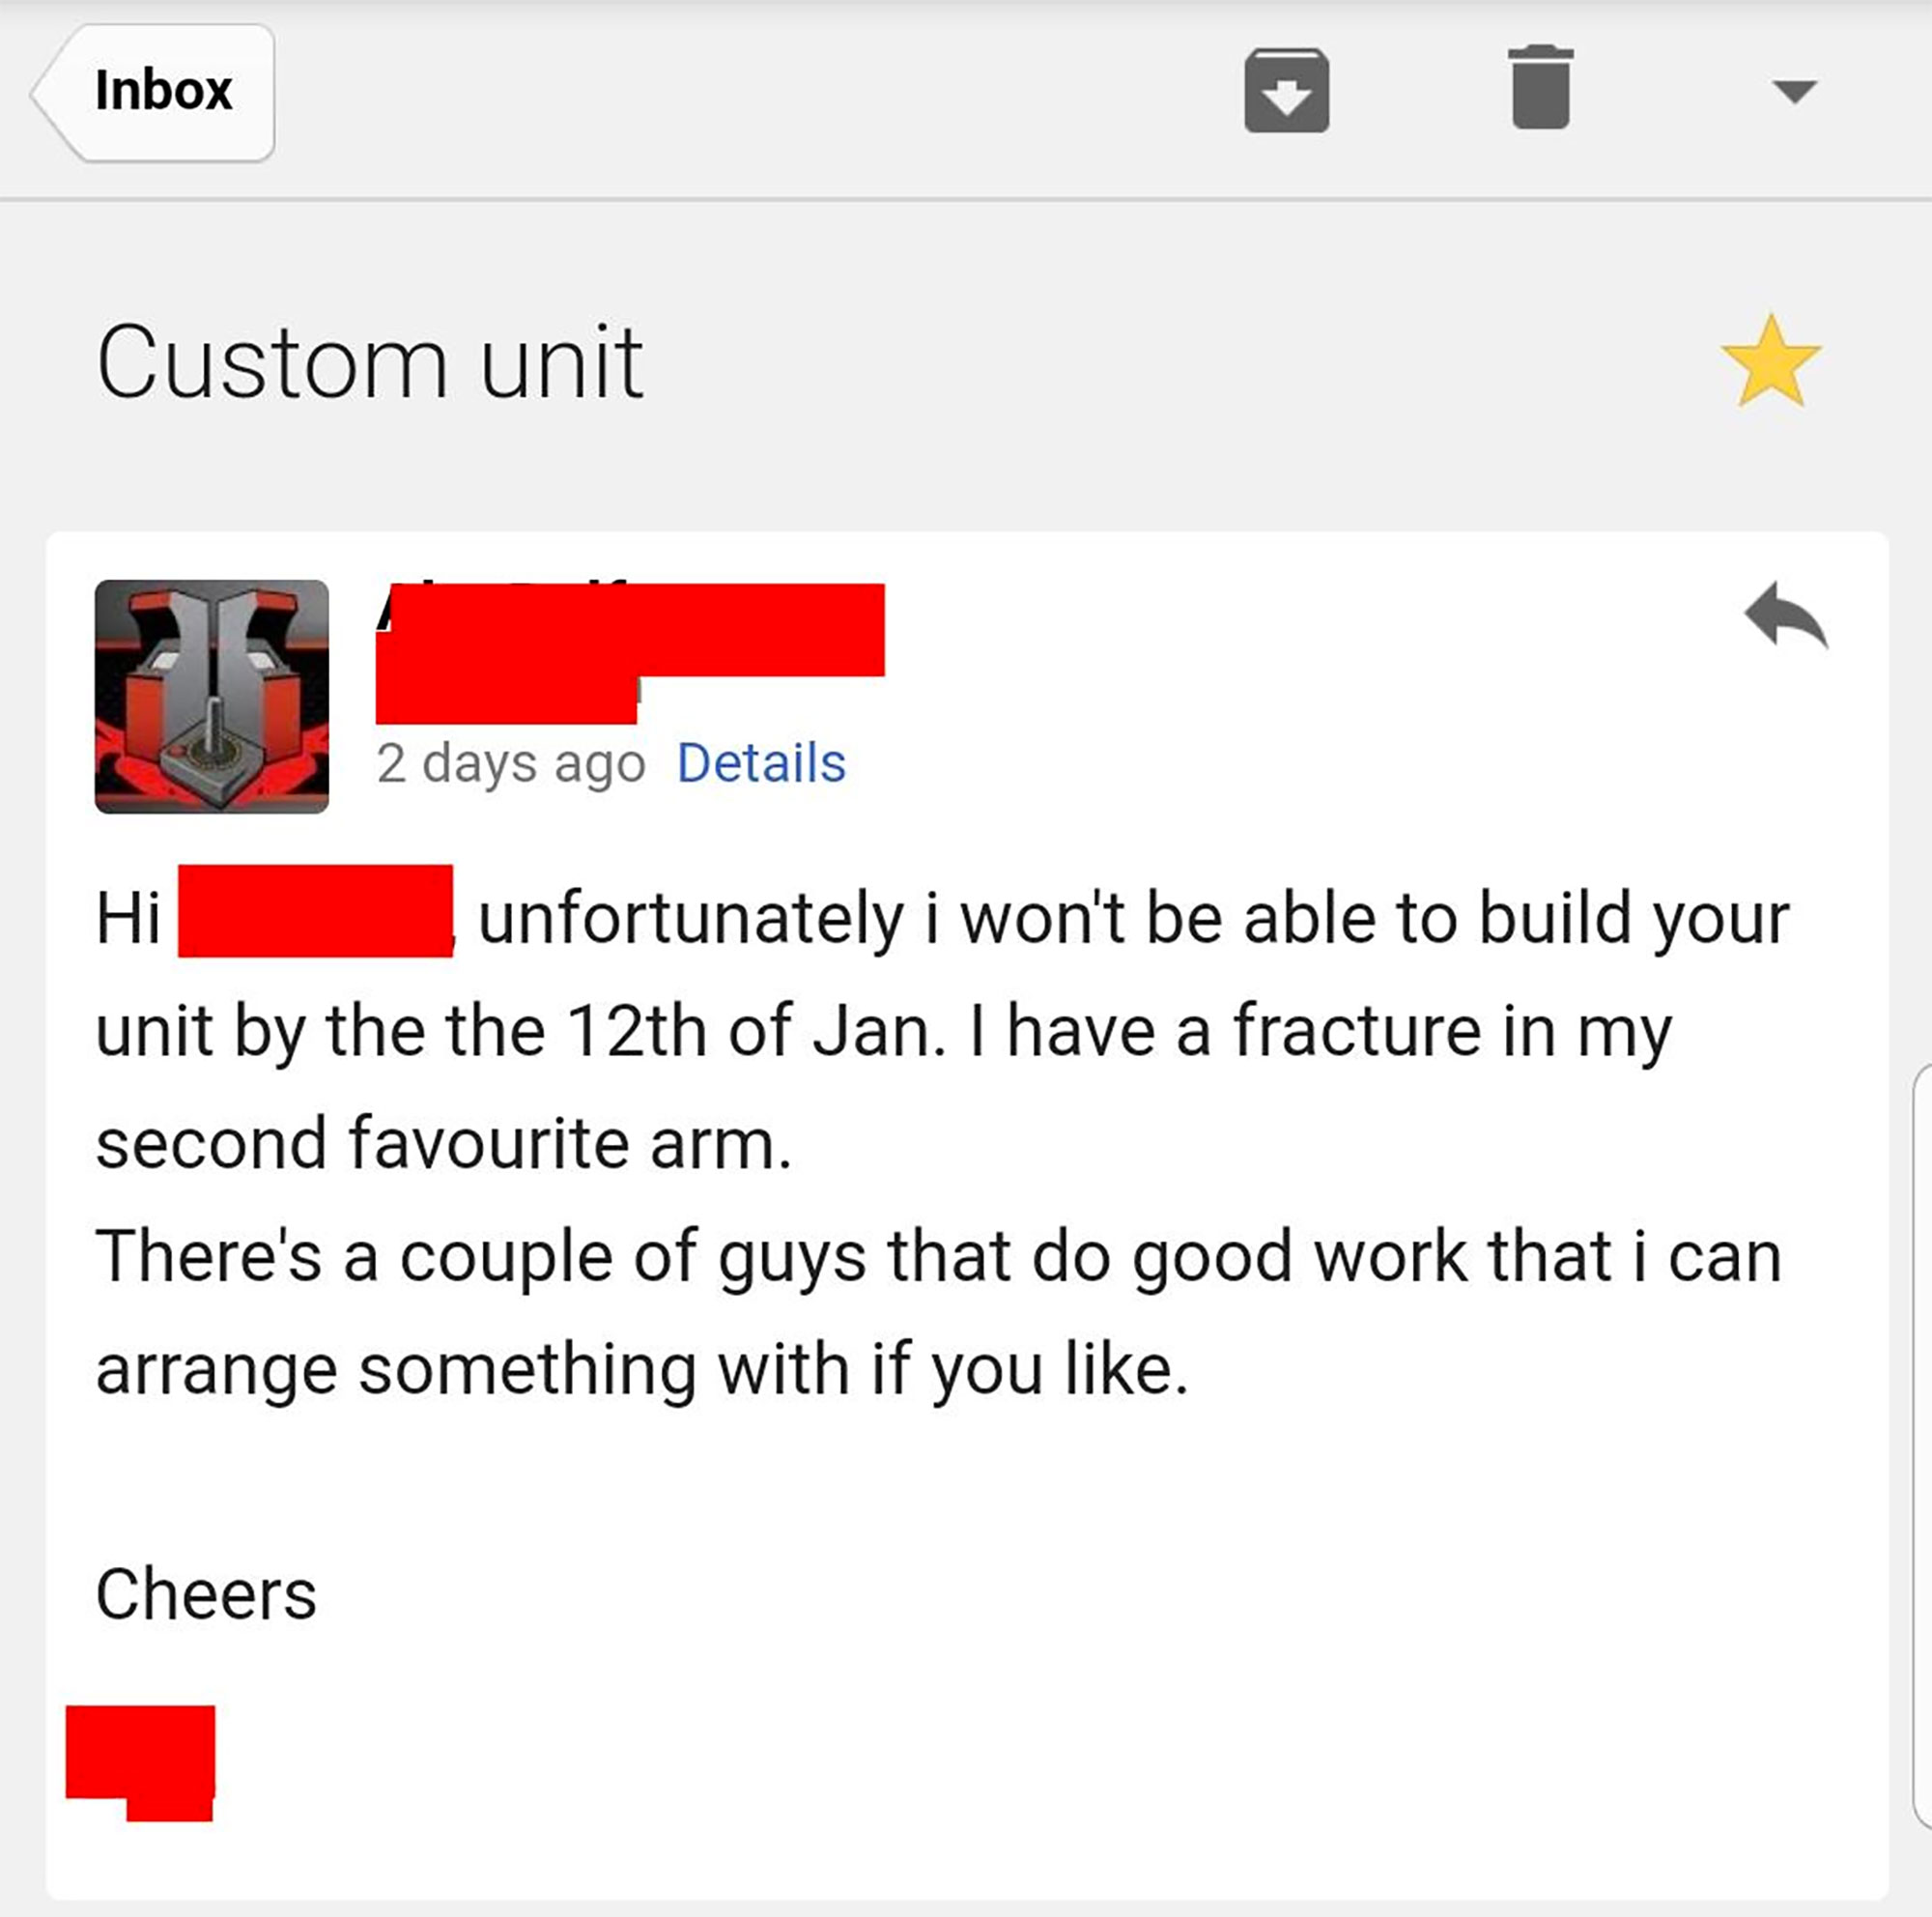 web page - Inbox Custom unit 2 days ago Details unfortunately i won't be able to build your unit by the the 12th of Jan. I have a fracture in my second favourite arm. There's a couple of guys that do good work that i can arrange something with if you . Ch